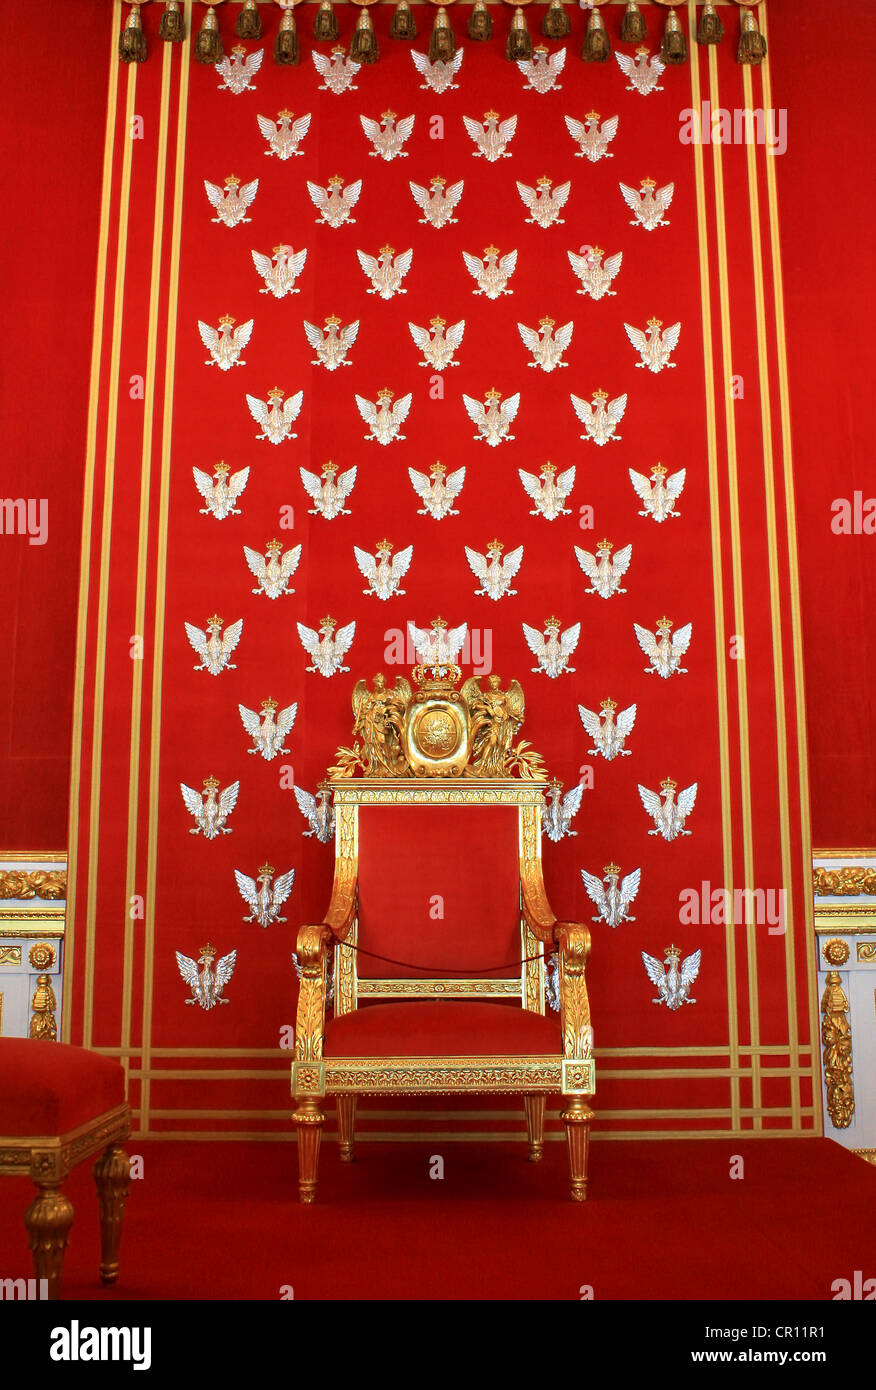 Throne of polish kings in royal castle of Warsaw in Poland Stock Photo